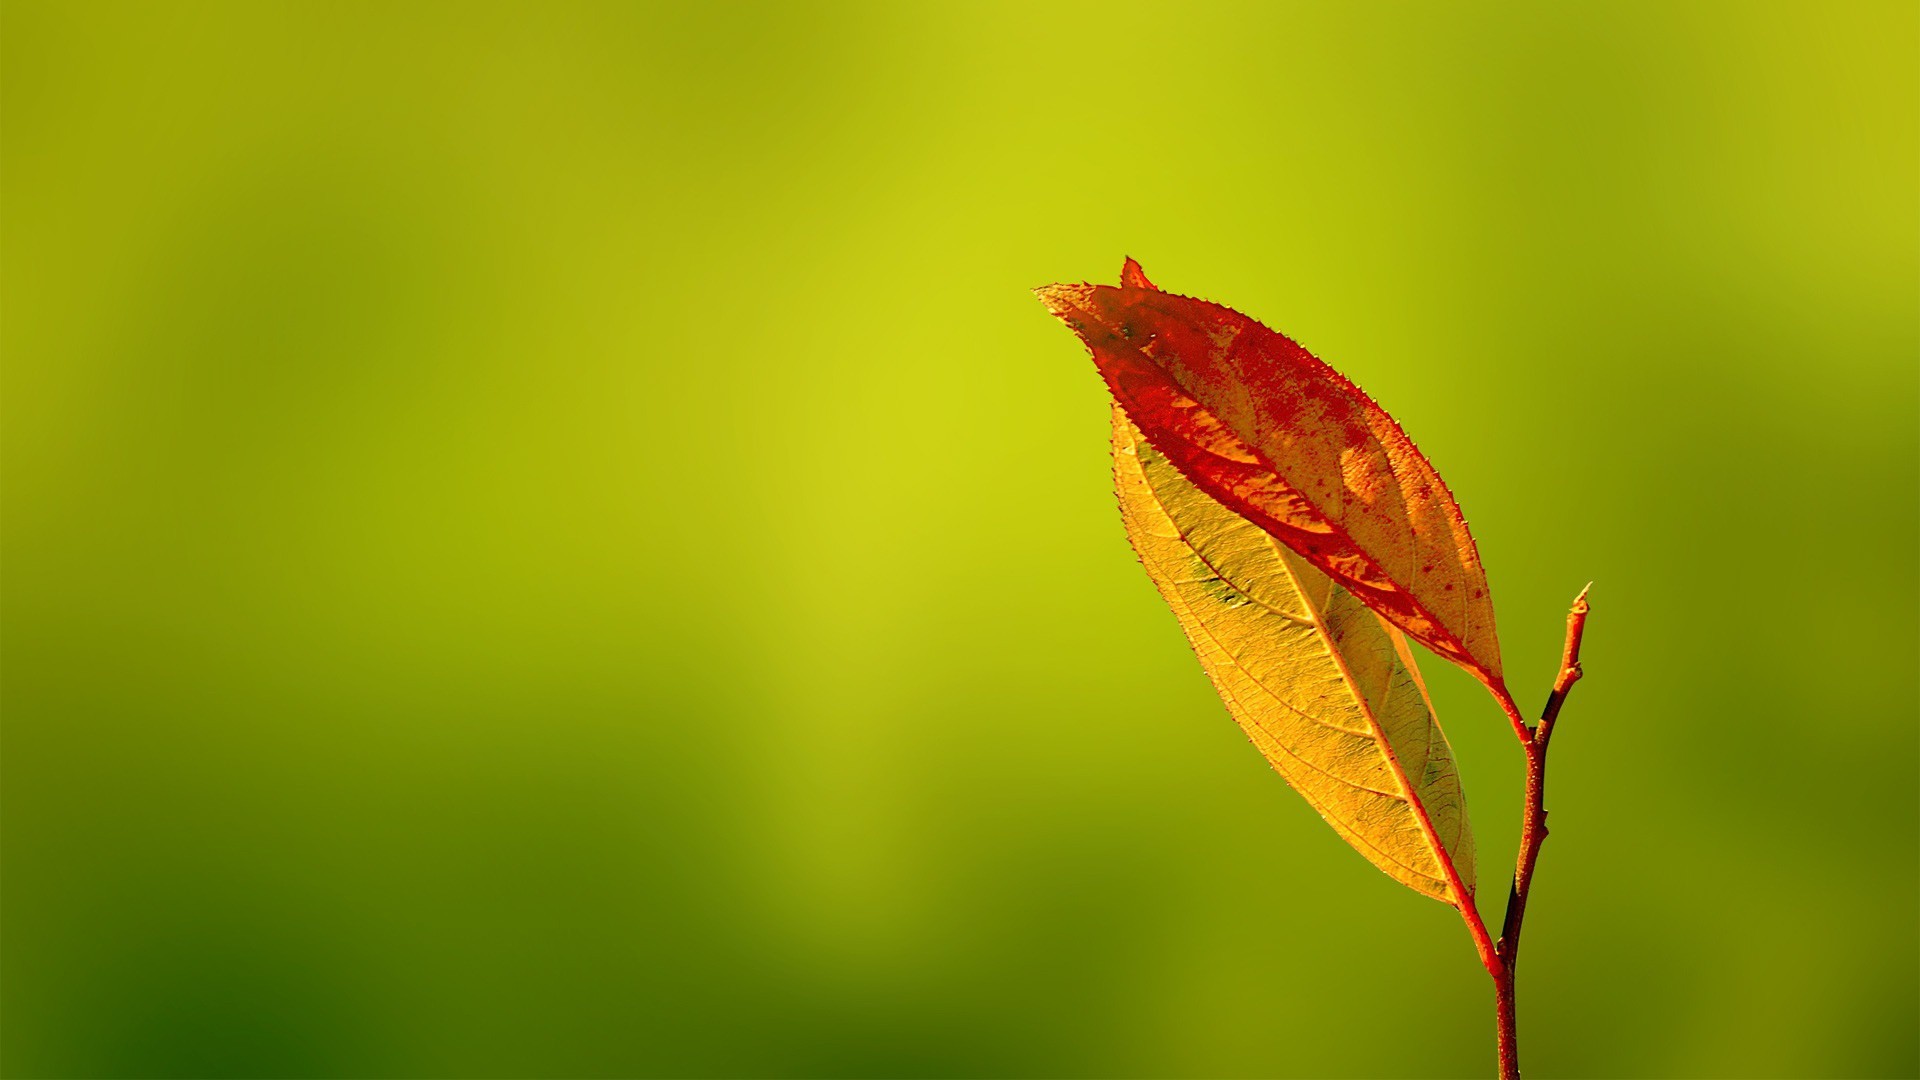 wallpaper images hd,leaf,green,red,water,macro photography